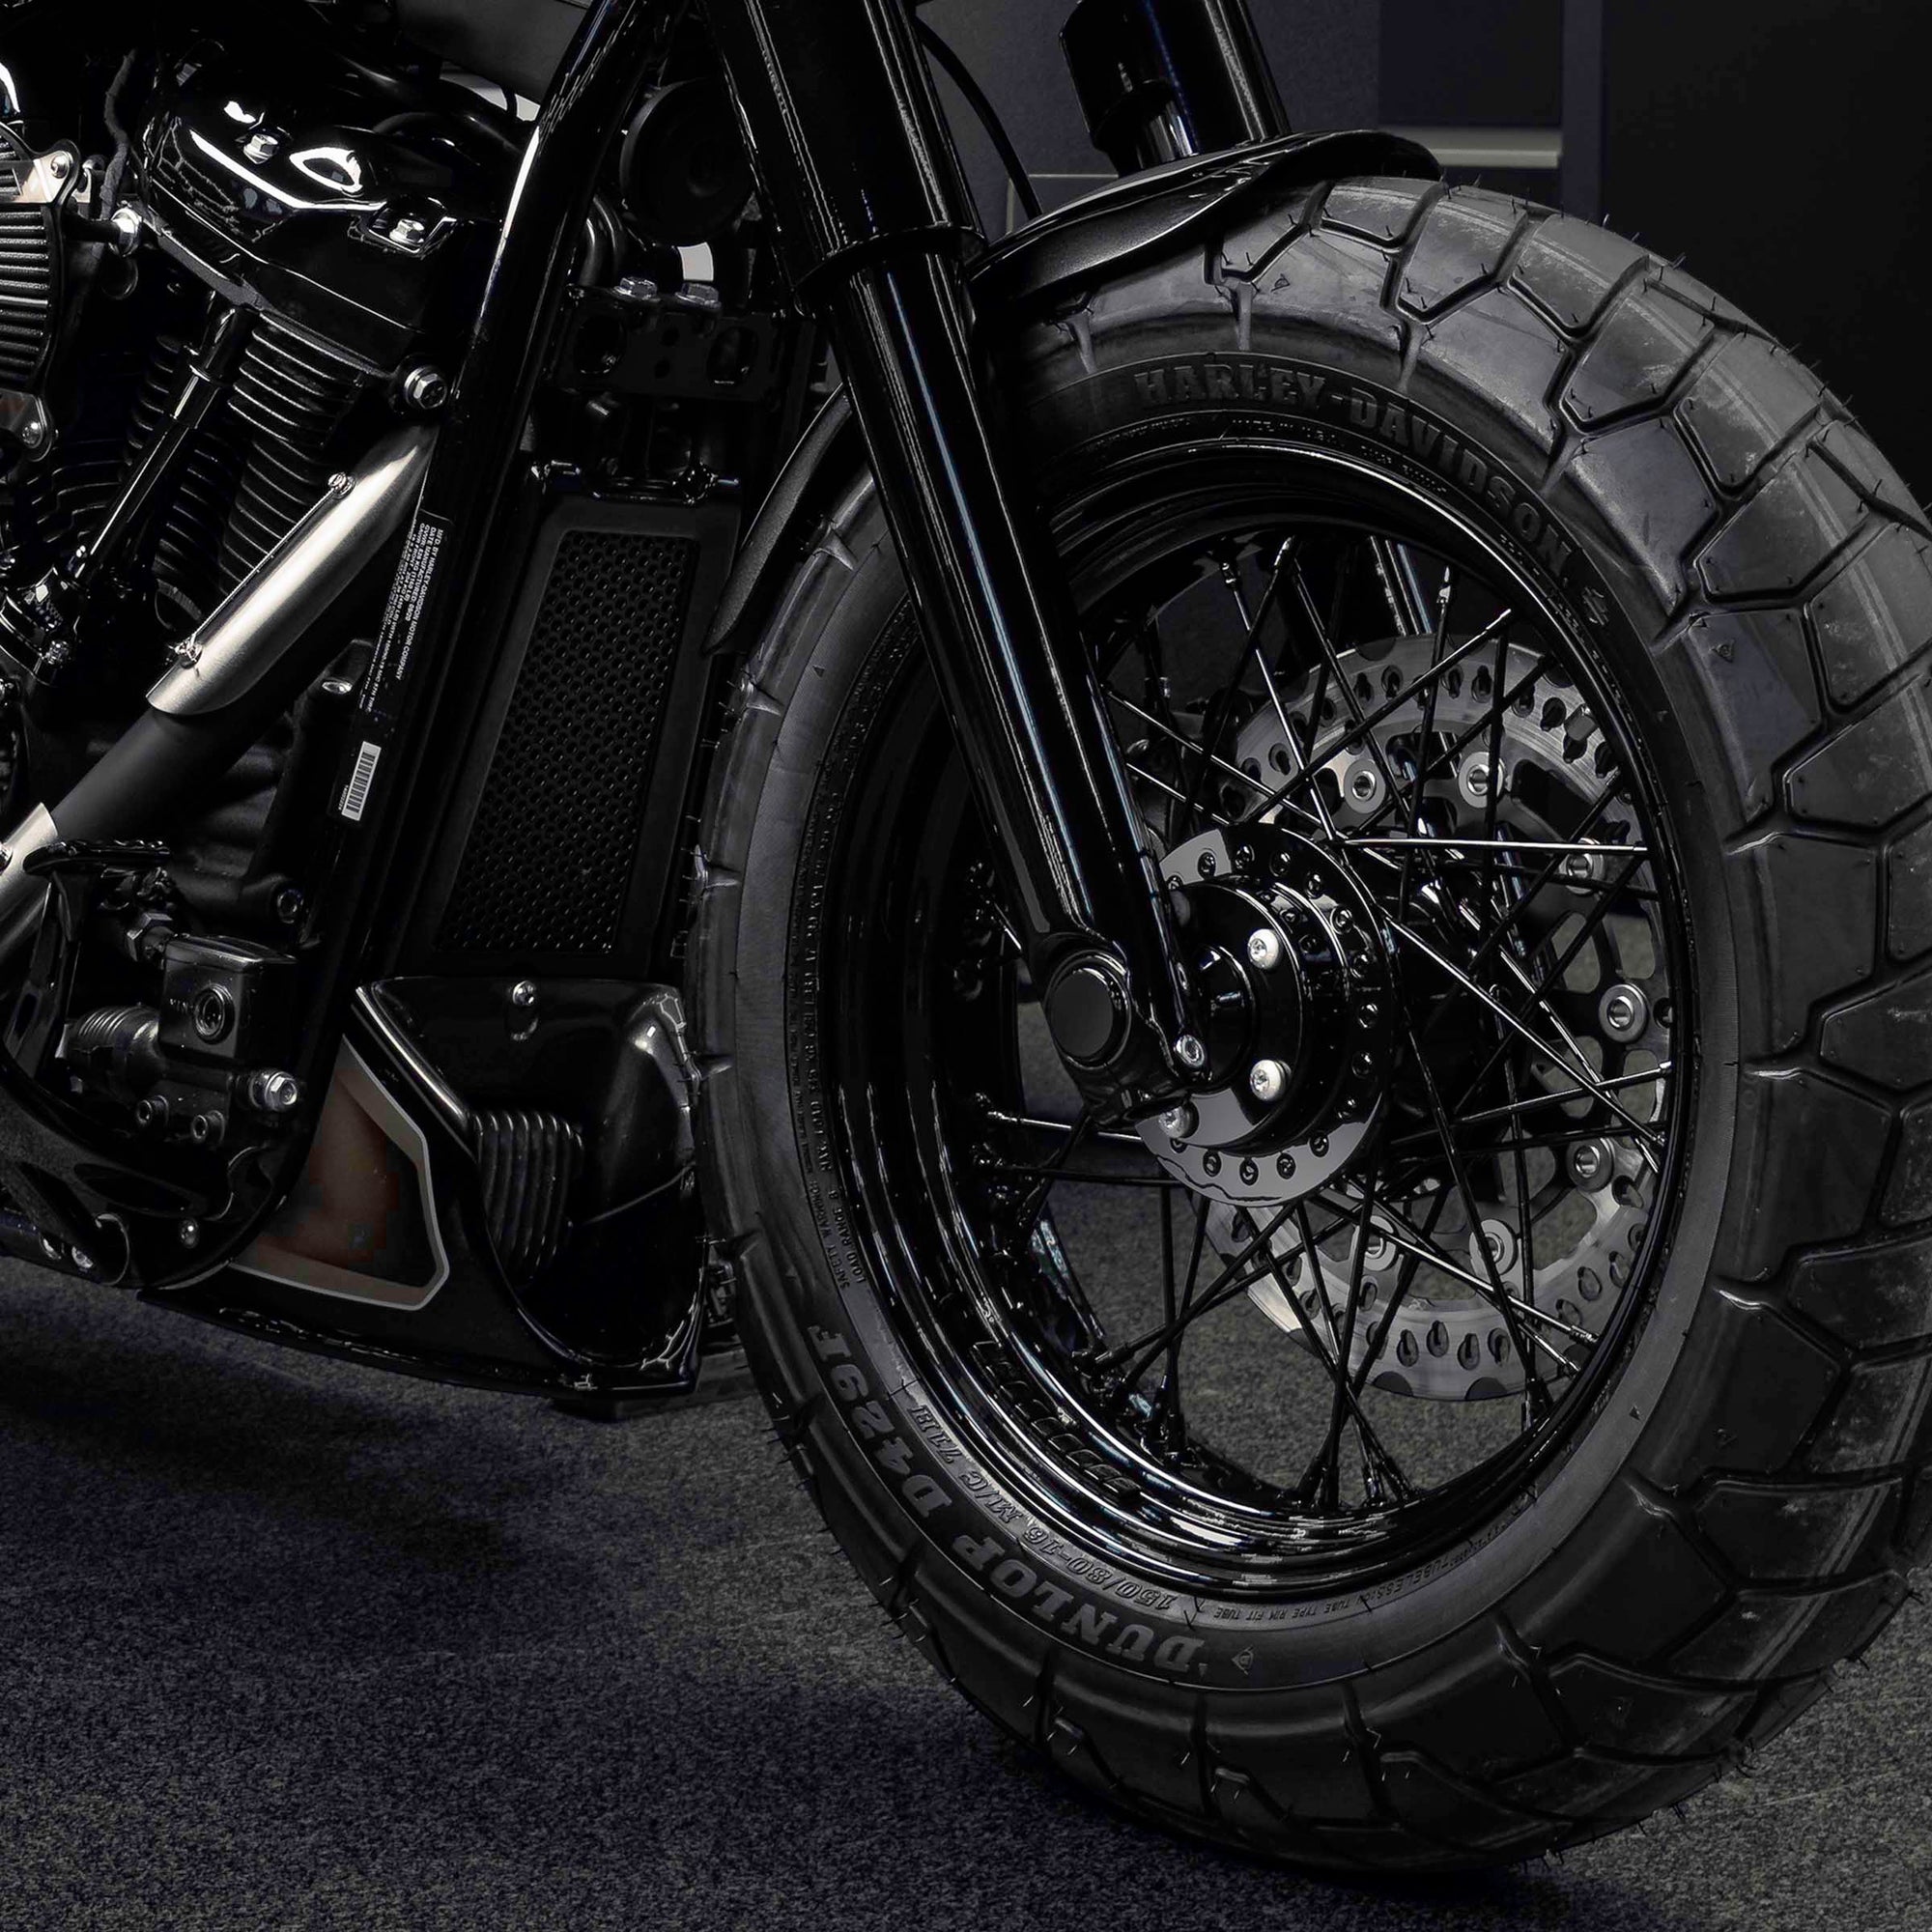 Zoomed Harley Davidson motorcycle with Killer Custom parts from the front grey background